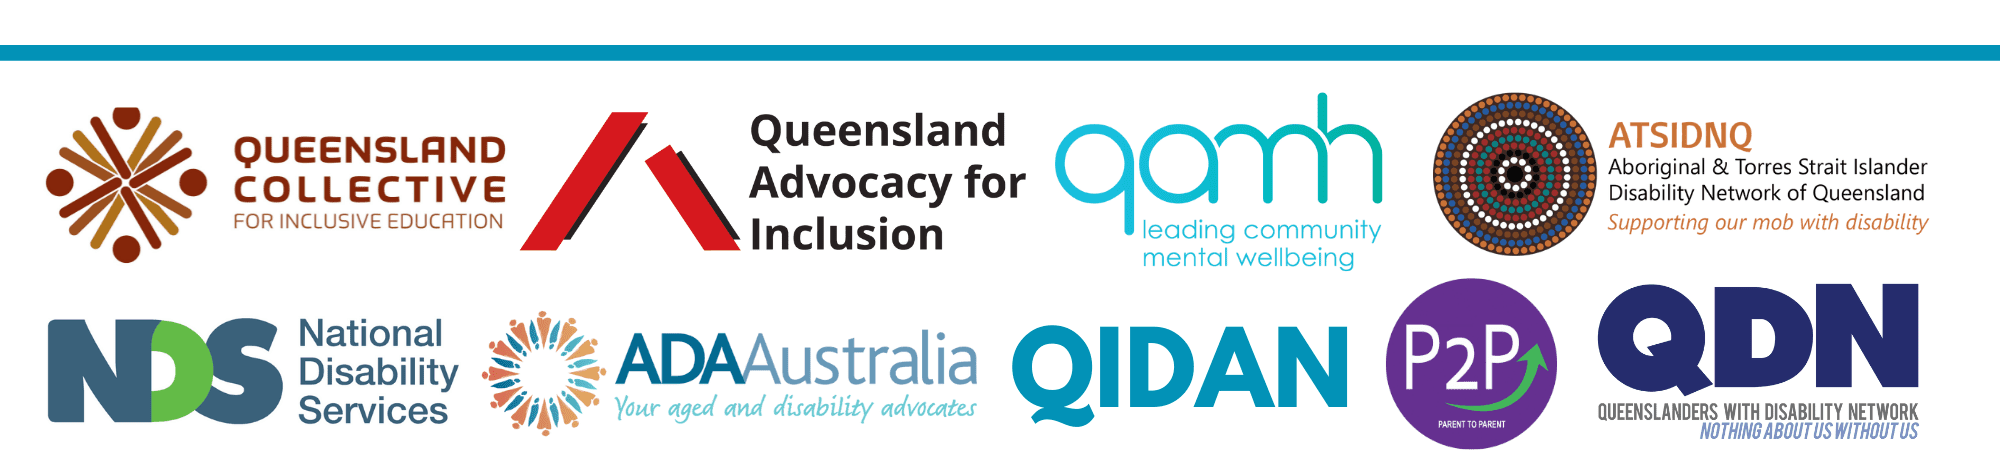 Group of logos Queensland Collective - For inclusive education Queensland Advocacy for Inclusion qamh - leading community mental wellbeing ATSIDNQ - Aboriginal and Torres Strait Islander Disability Network of Queensland - Supporting our mob with disability NDS - National Disability Services ADA Australia - Your aged and disability advocates QIDAN PSP - Parent to parent QDN - Queenslanders with Disability Network - Nothing about us without us